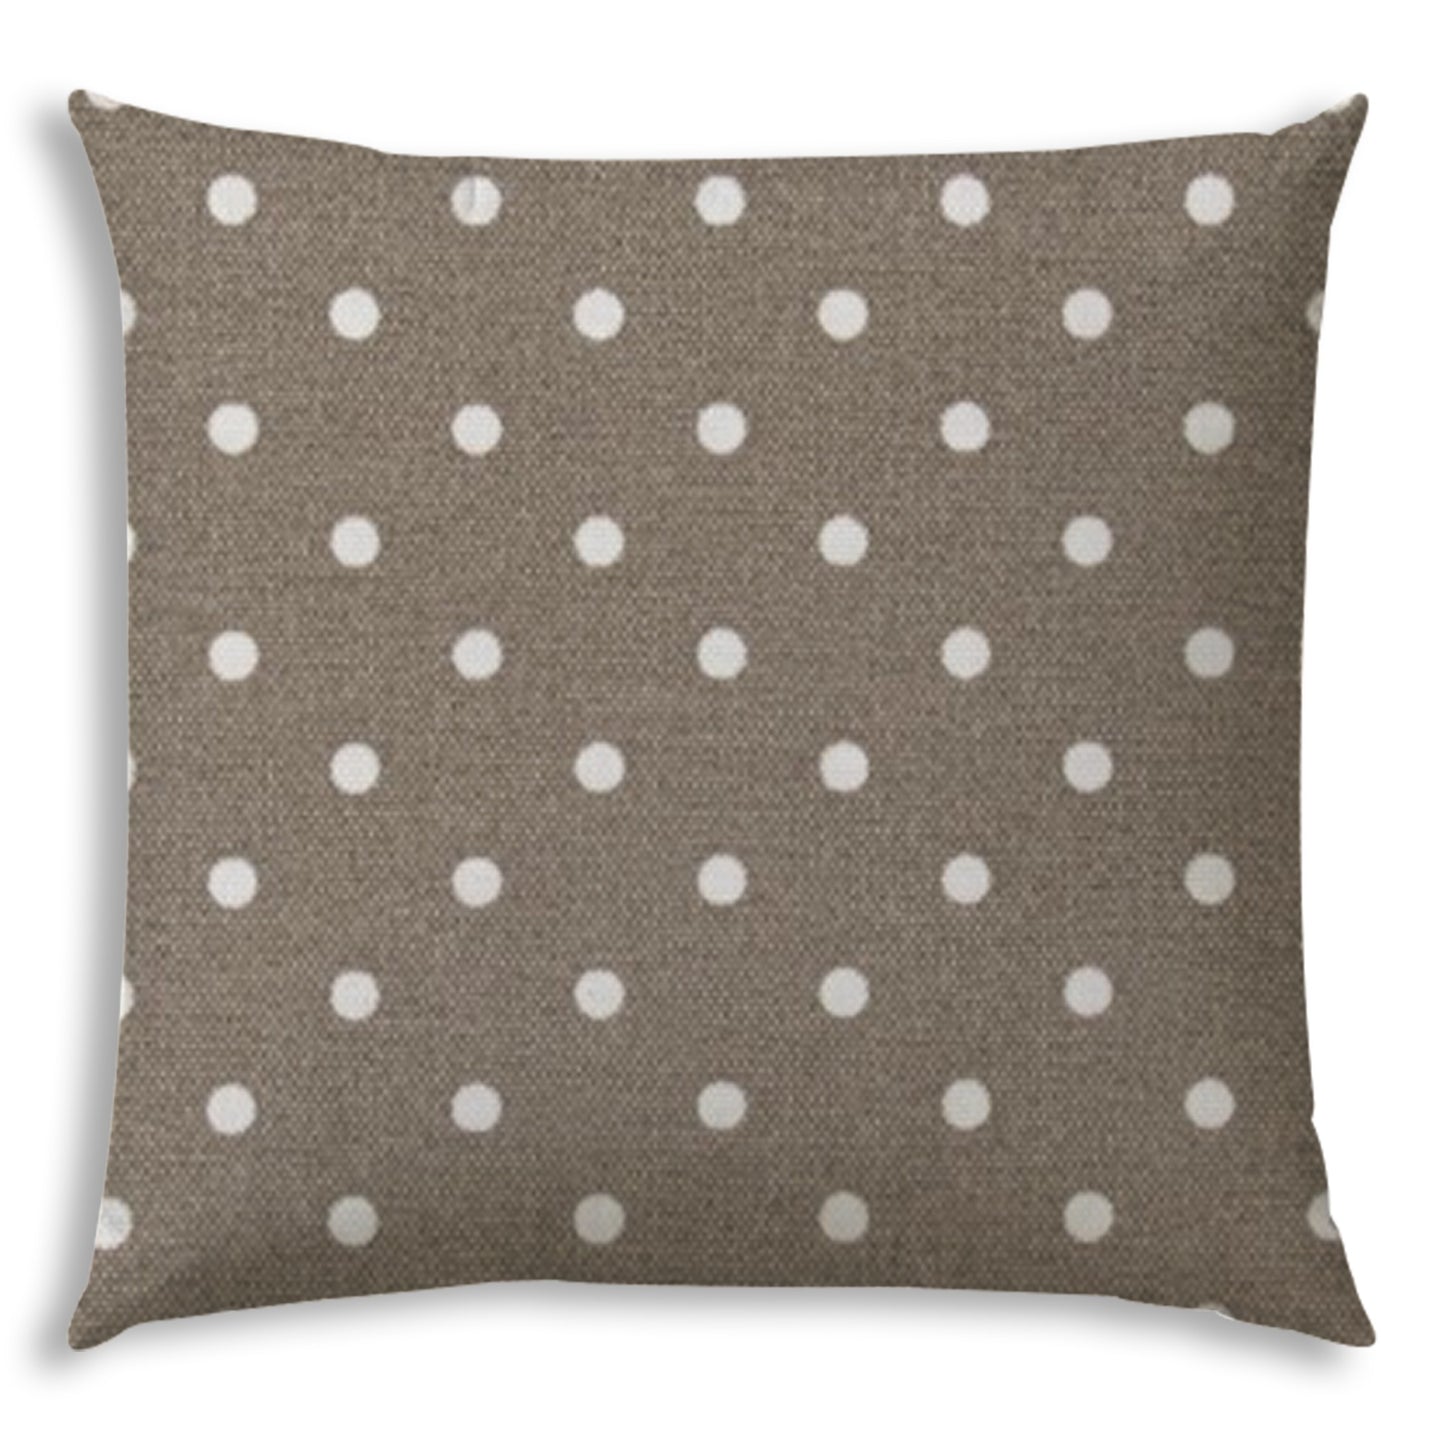 17" Taupe and White Polka Dots Indoor Outdoor Throw Pillow